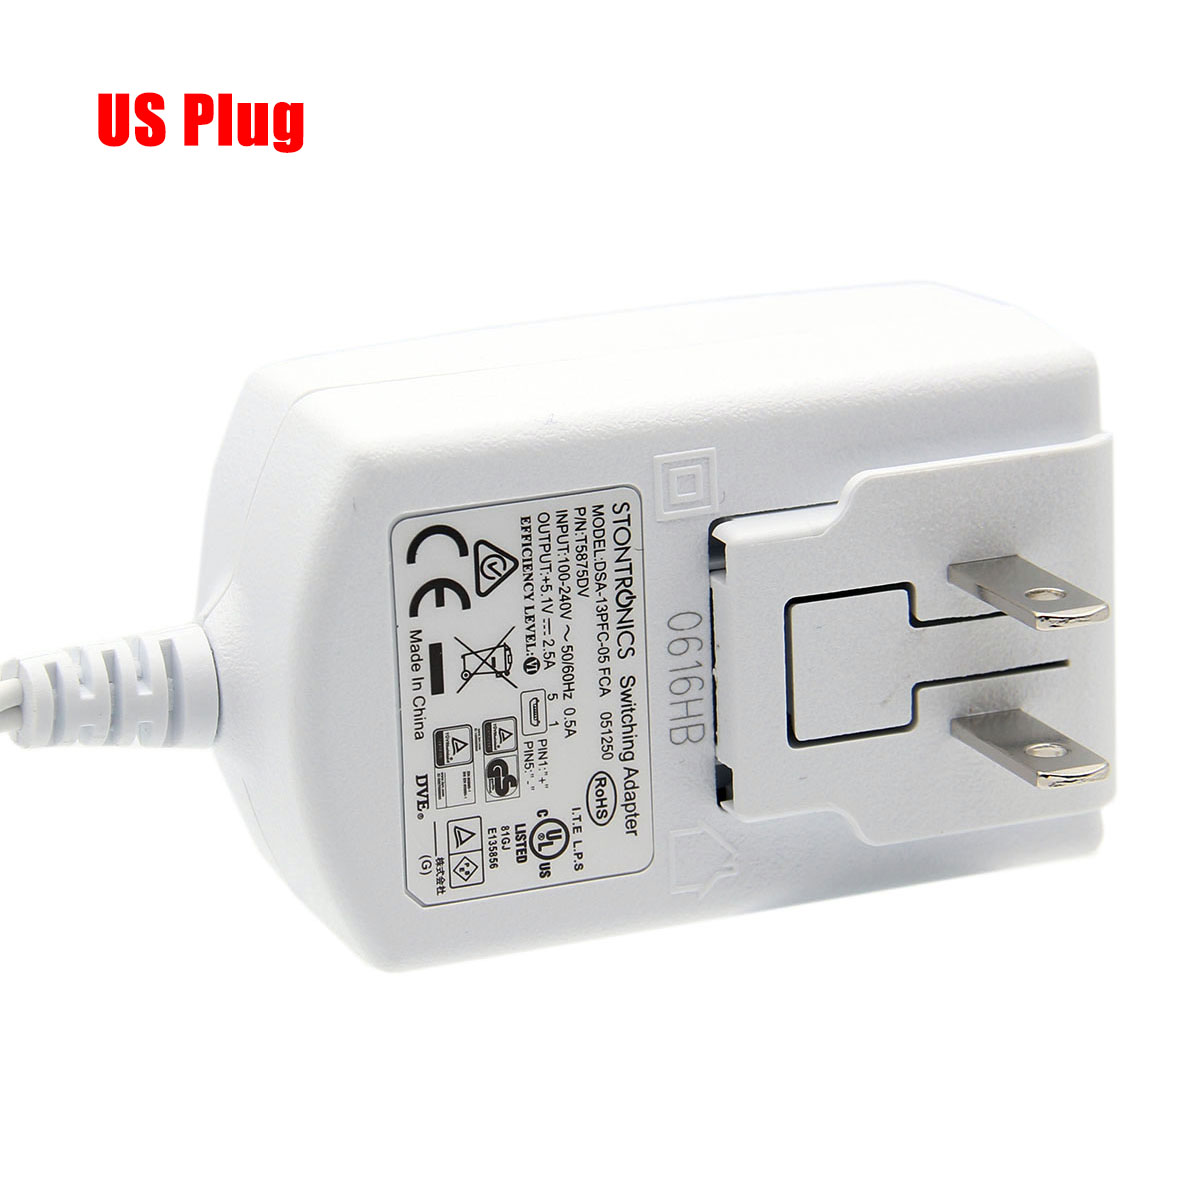 Official-Power-Supply-Charger-For-Raspberry-Pi-Cell-Phone-Tablet-With-AU-EU-UK-US-Plug-1043221